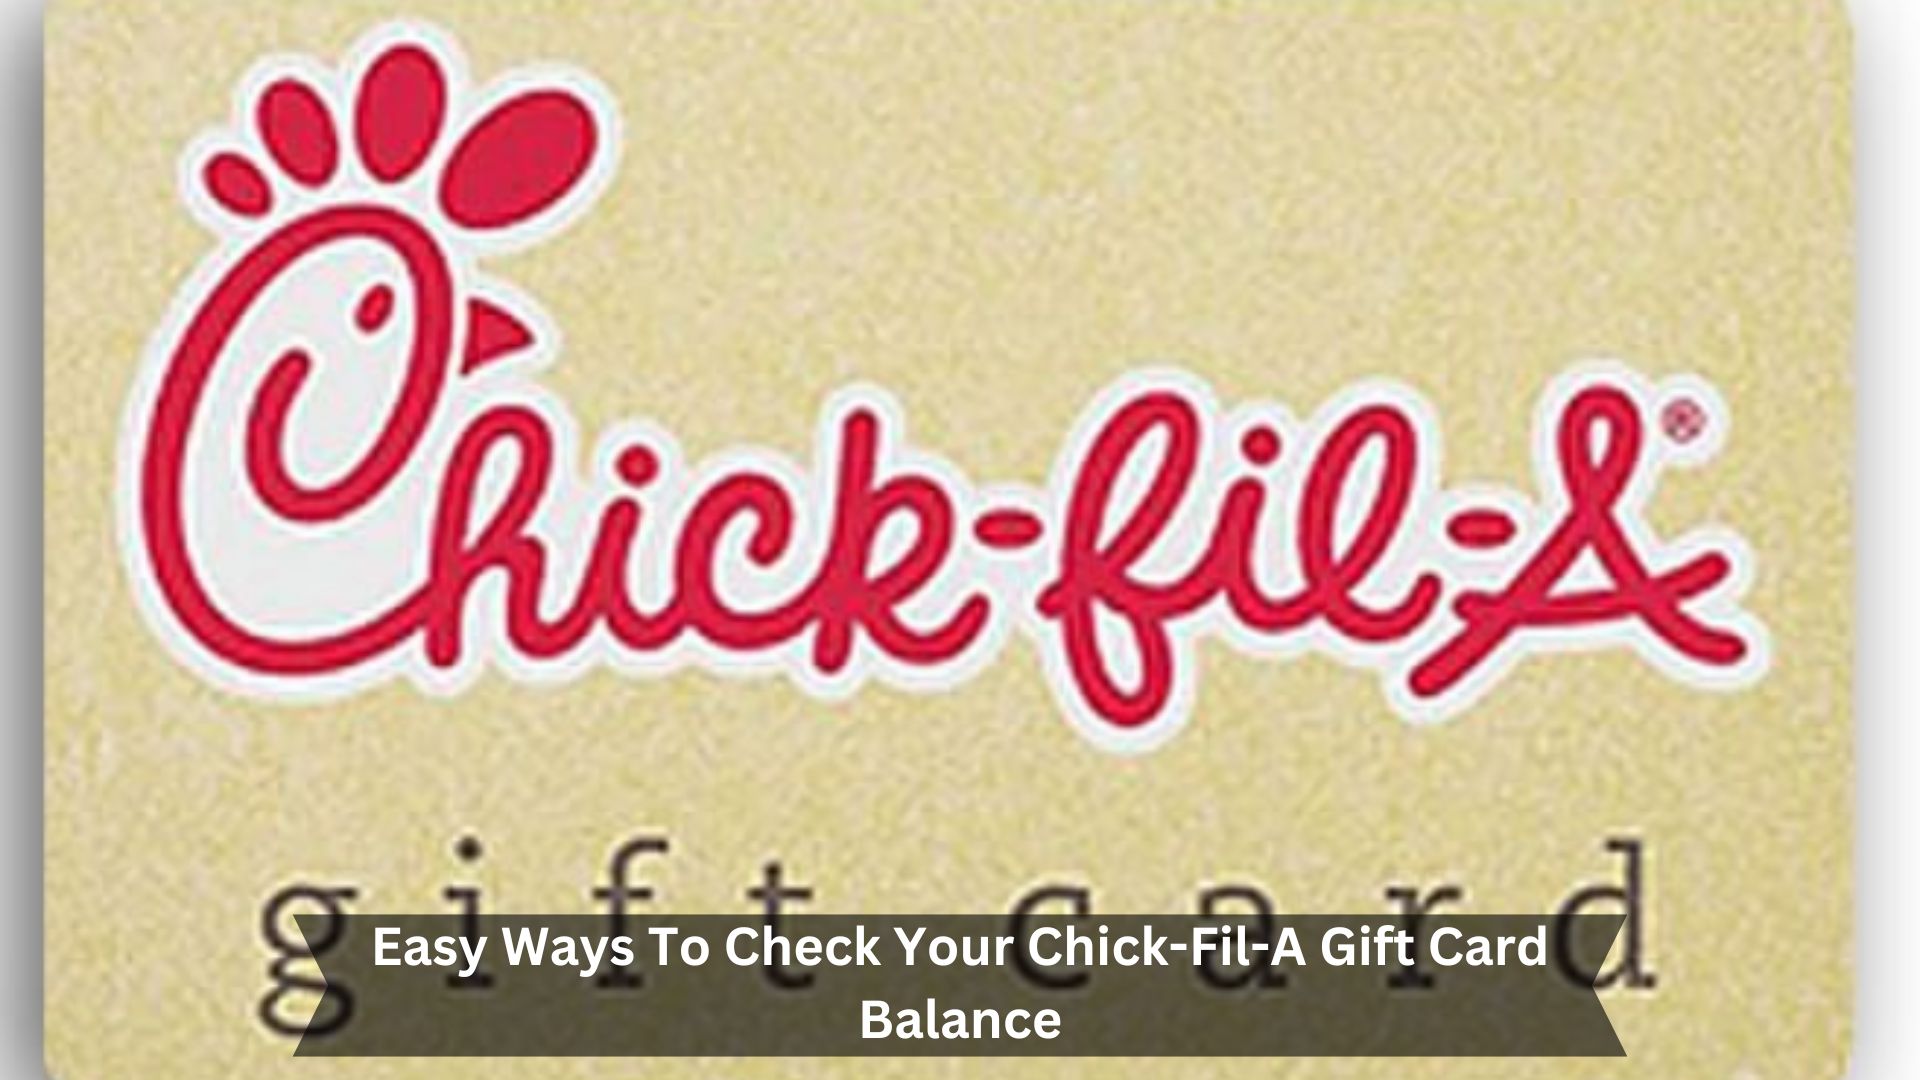 Easy-Ways-To-Check-Your-Chick-Fil-A-Gift-Card-Balance